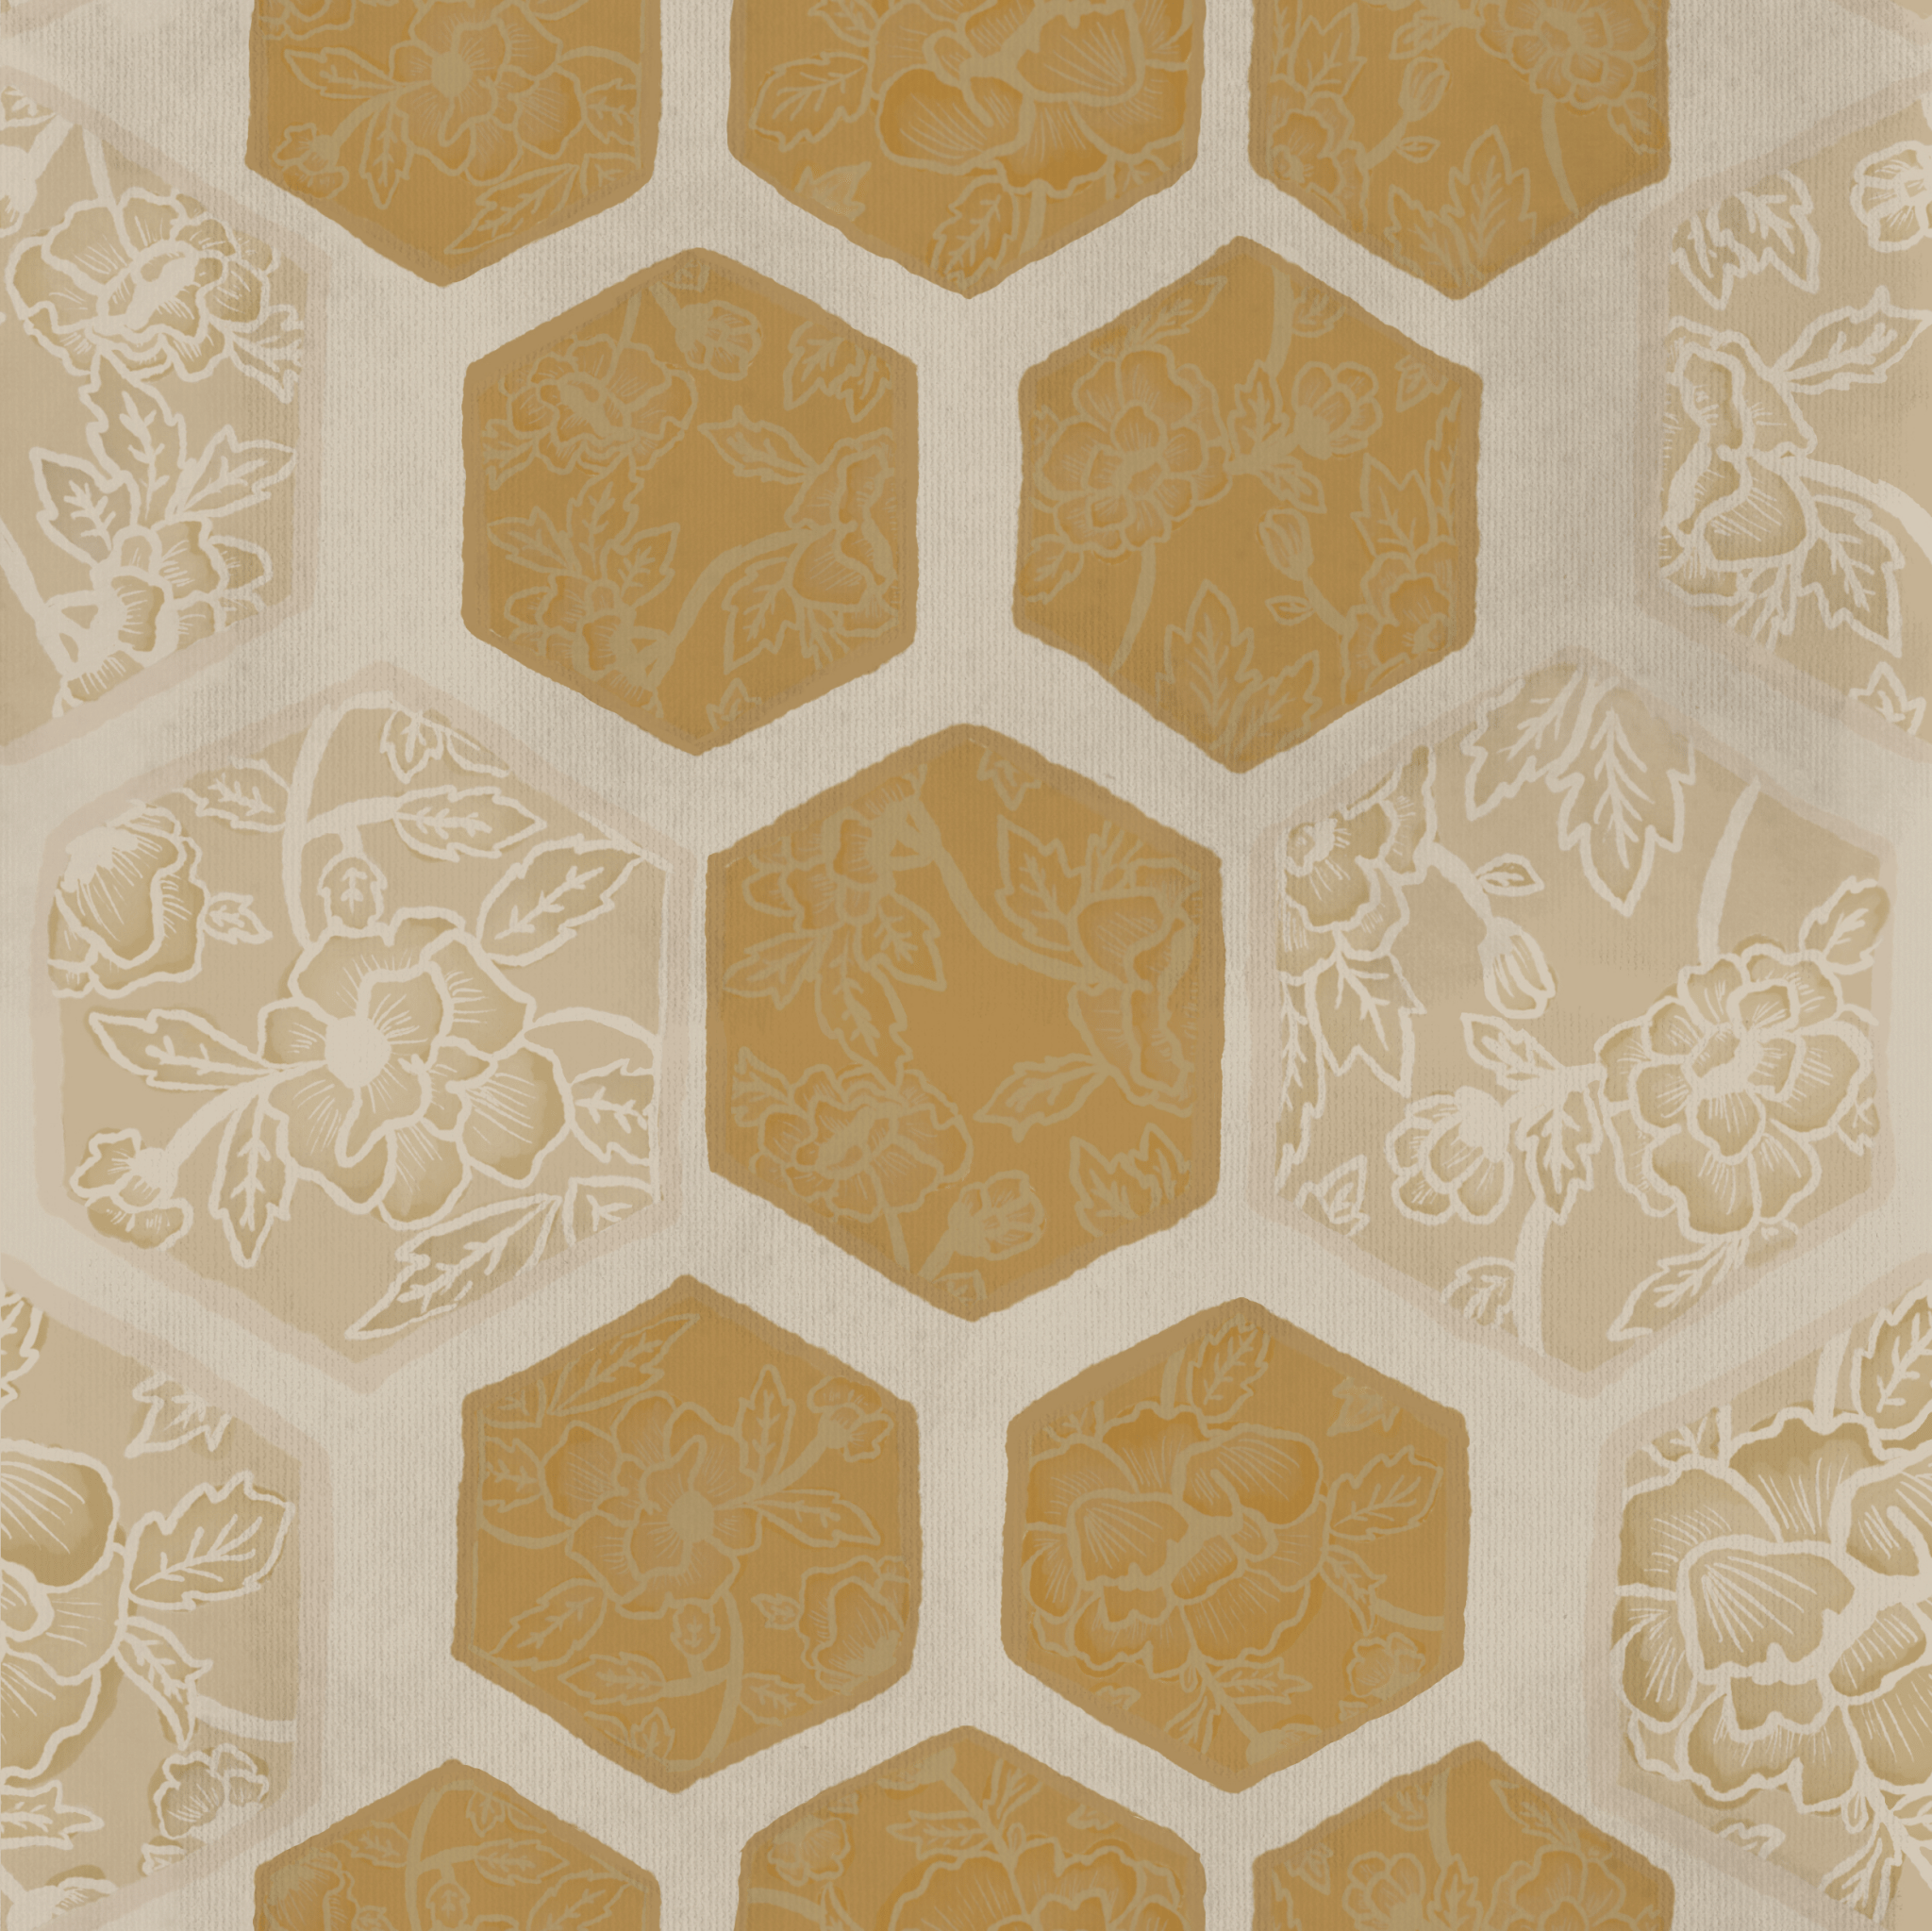 Close-up of honeycomb flower wallpaper with a pattern of beige and gold hexagons, each with intricate floral motifs, creating a warm and stylish aesthetic